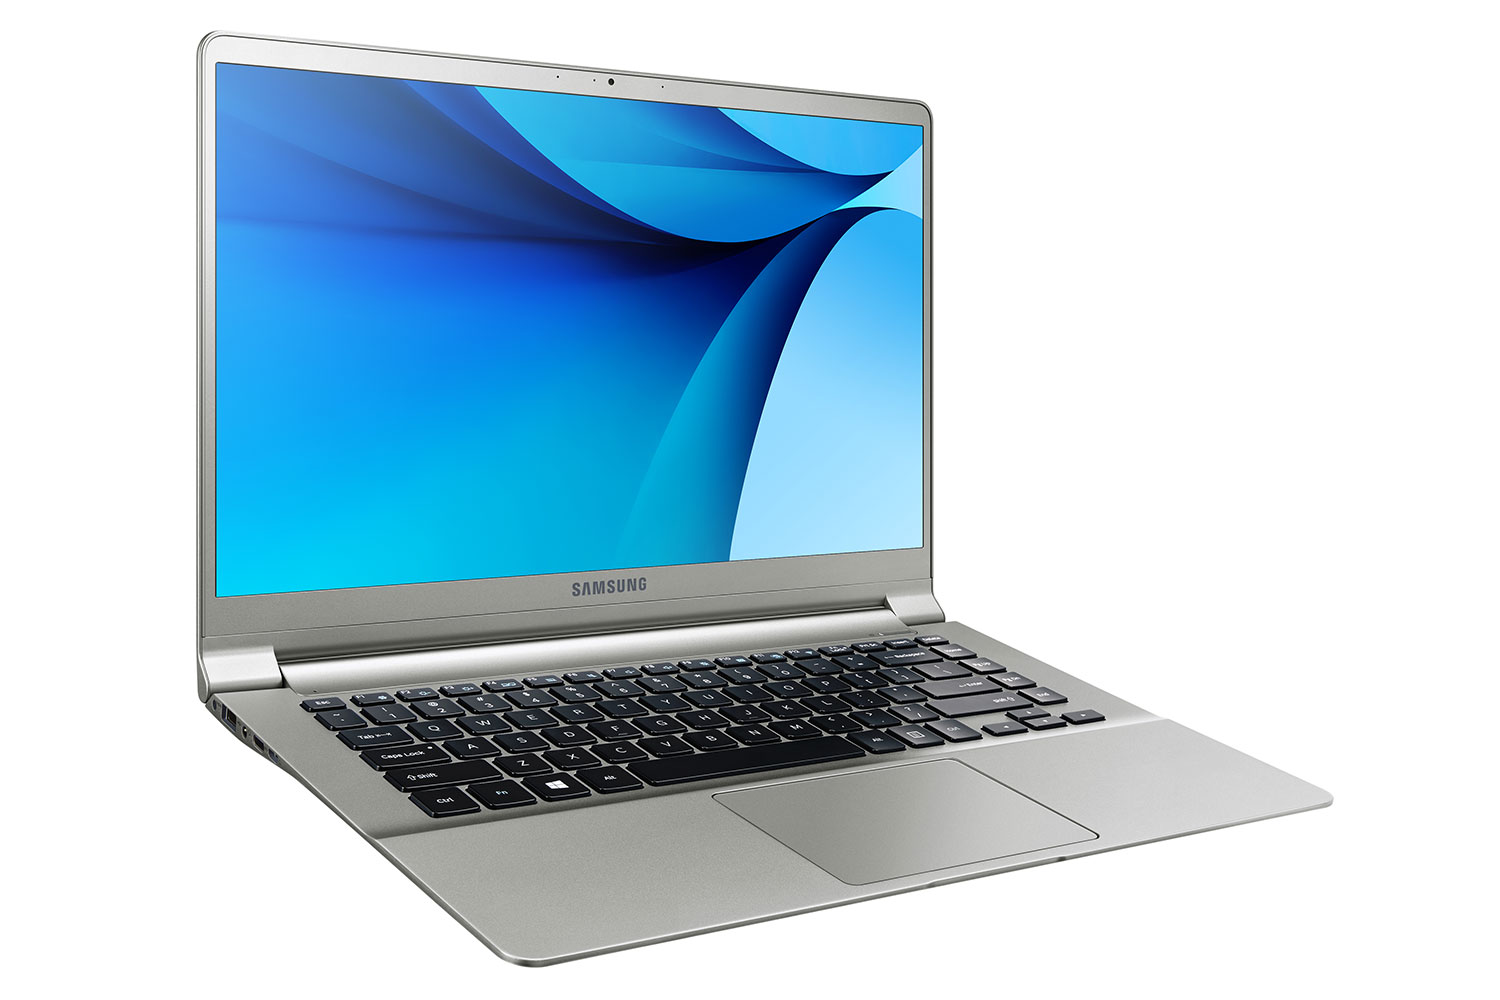 samsung debuts new galaxy tabpro s 2 in 1 book 9 laptops at ces 2016 15 22